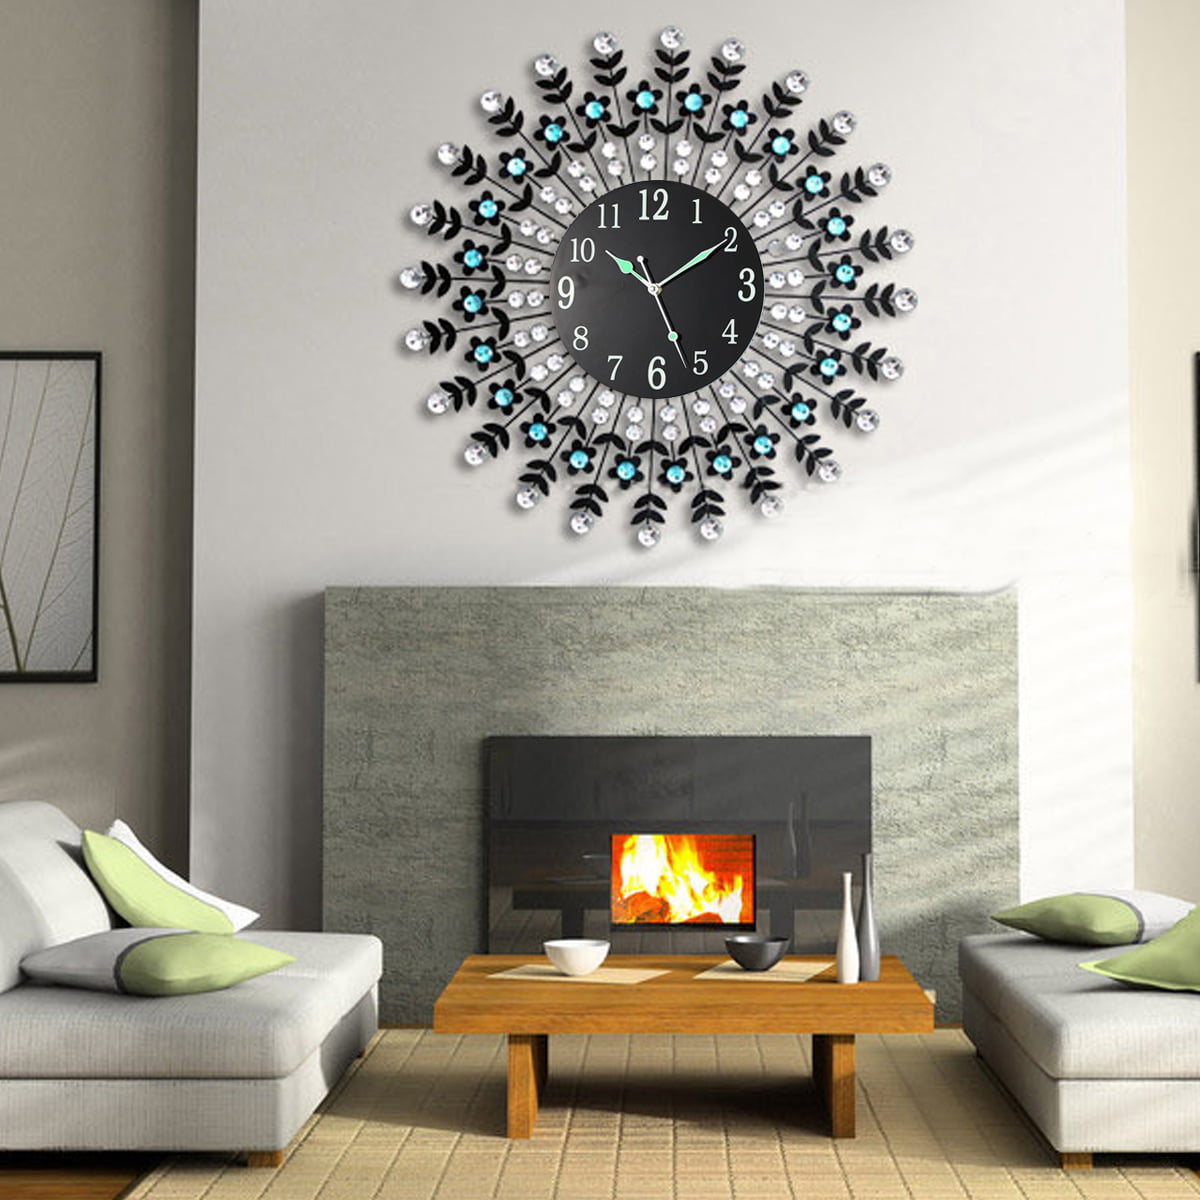 Hot New Large Wall Clock 3D Home Room Office Decor black glass wood grand modern 